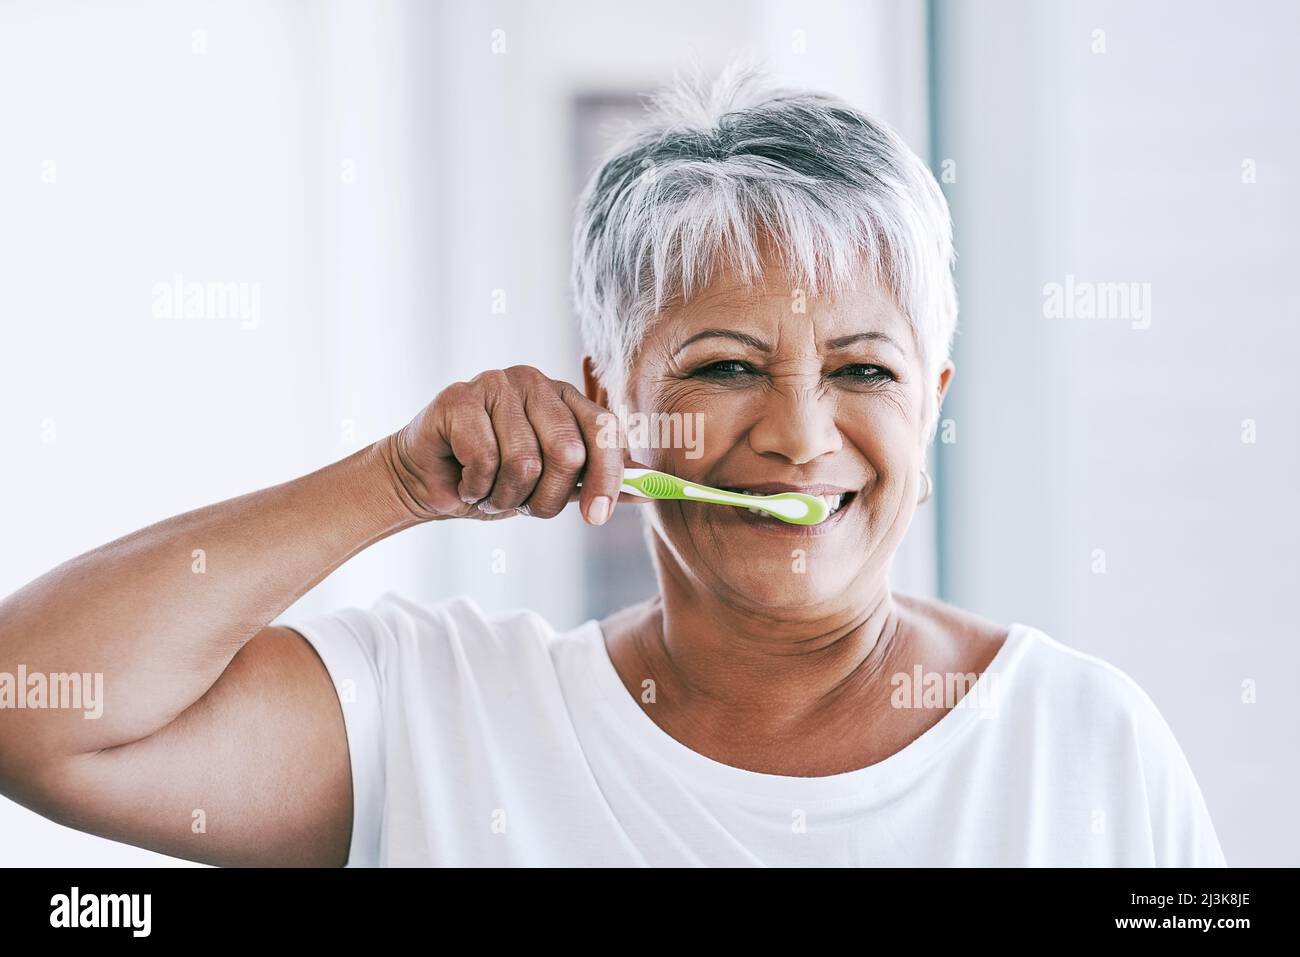 Early morning routines. Portrait of a cheerful mature woman brushing her teeth while looking at the camera at home. Stock Photo